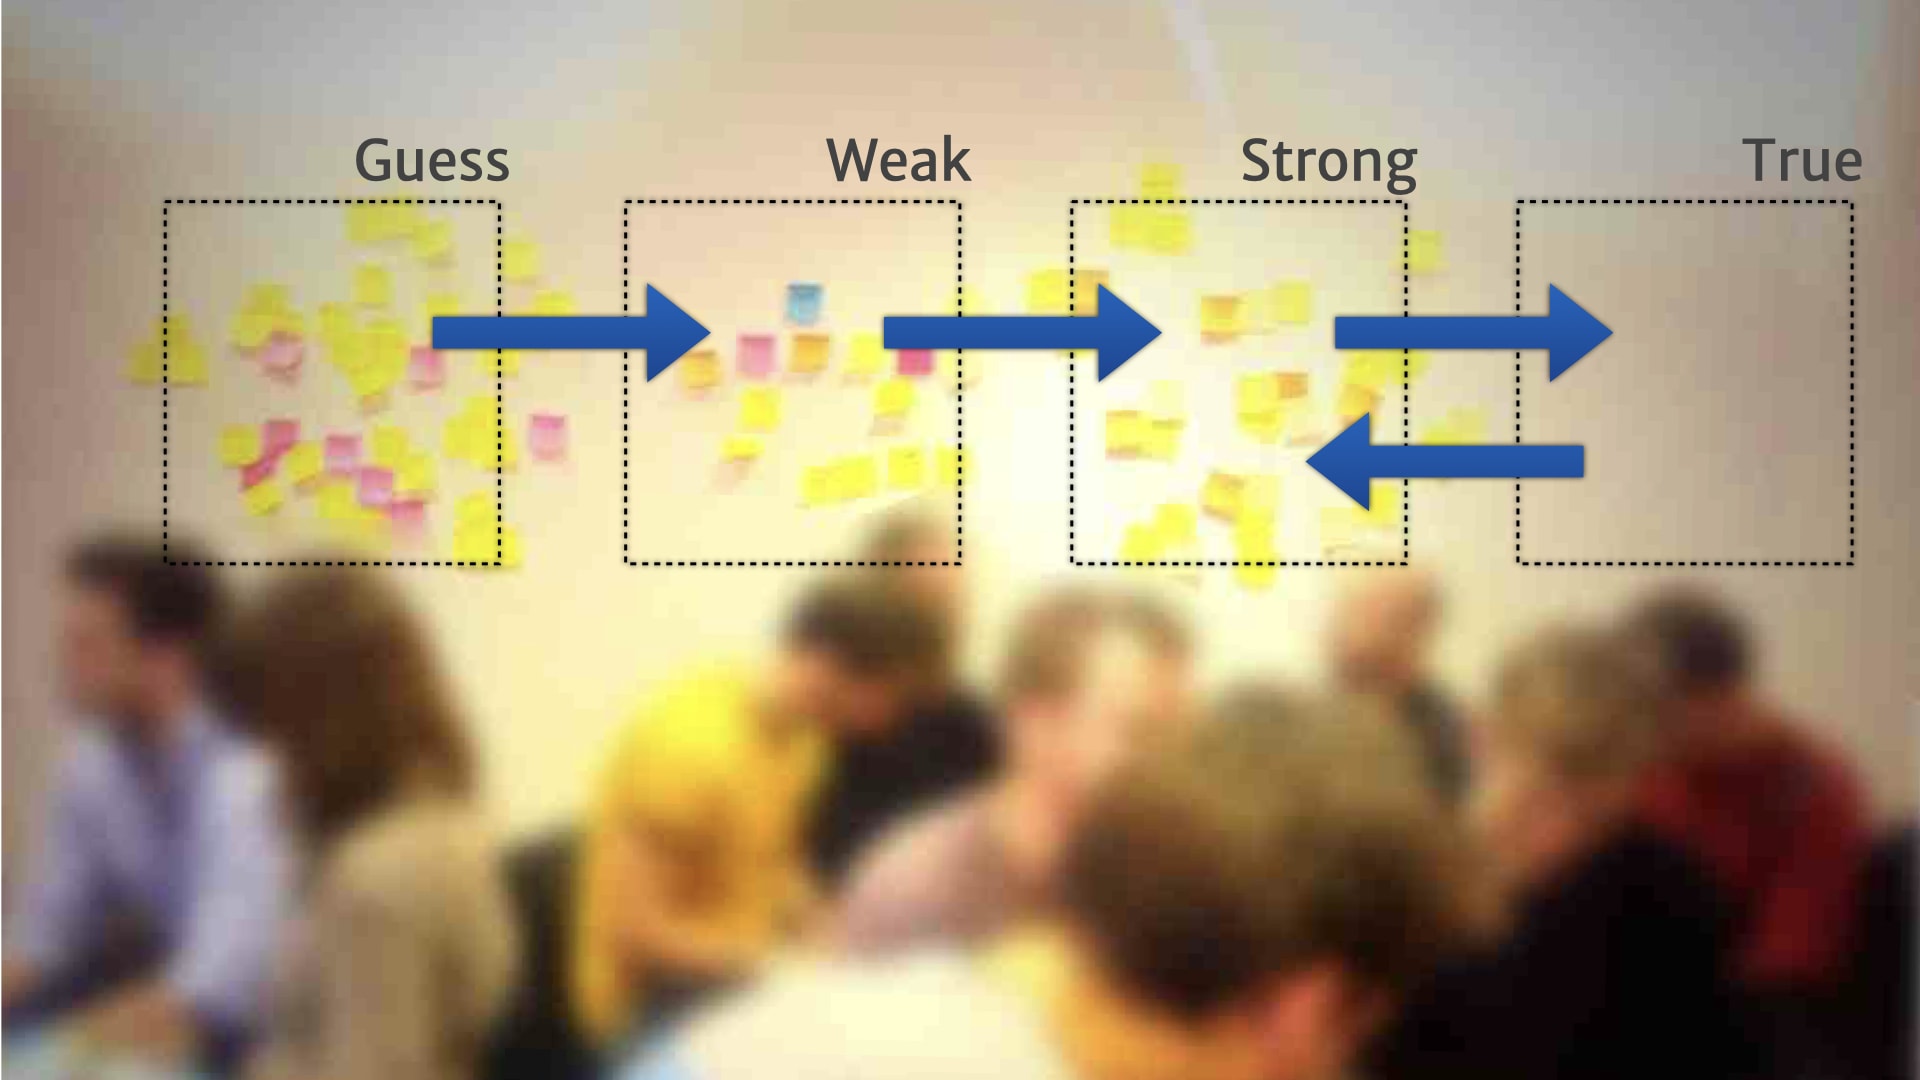 A picture of a wall of post-it notes divided into four categories running left to right (Guess, Weak, Strong, and True). Blue arrows running left-to-right show transitions from Guess to Weak, from Weak to Strong, and from Strong to True. A blue arrow running right-to-left illustrates a transition back from True to Strong.